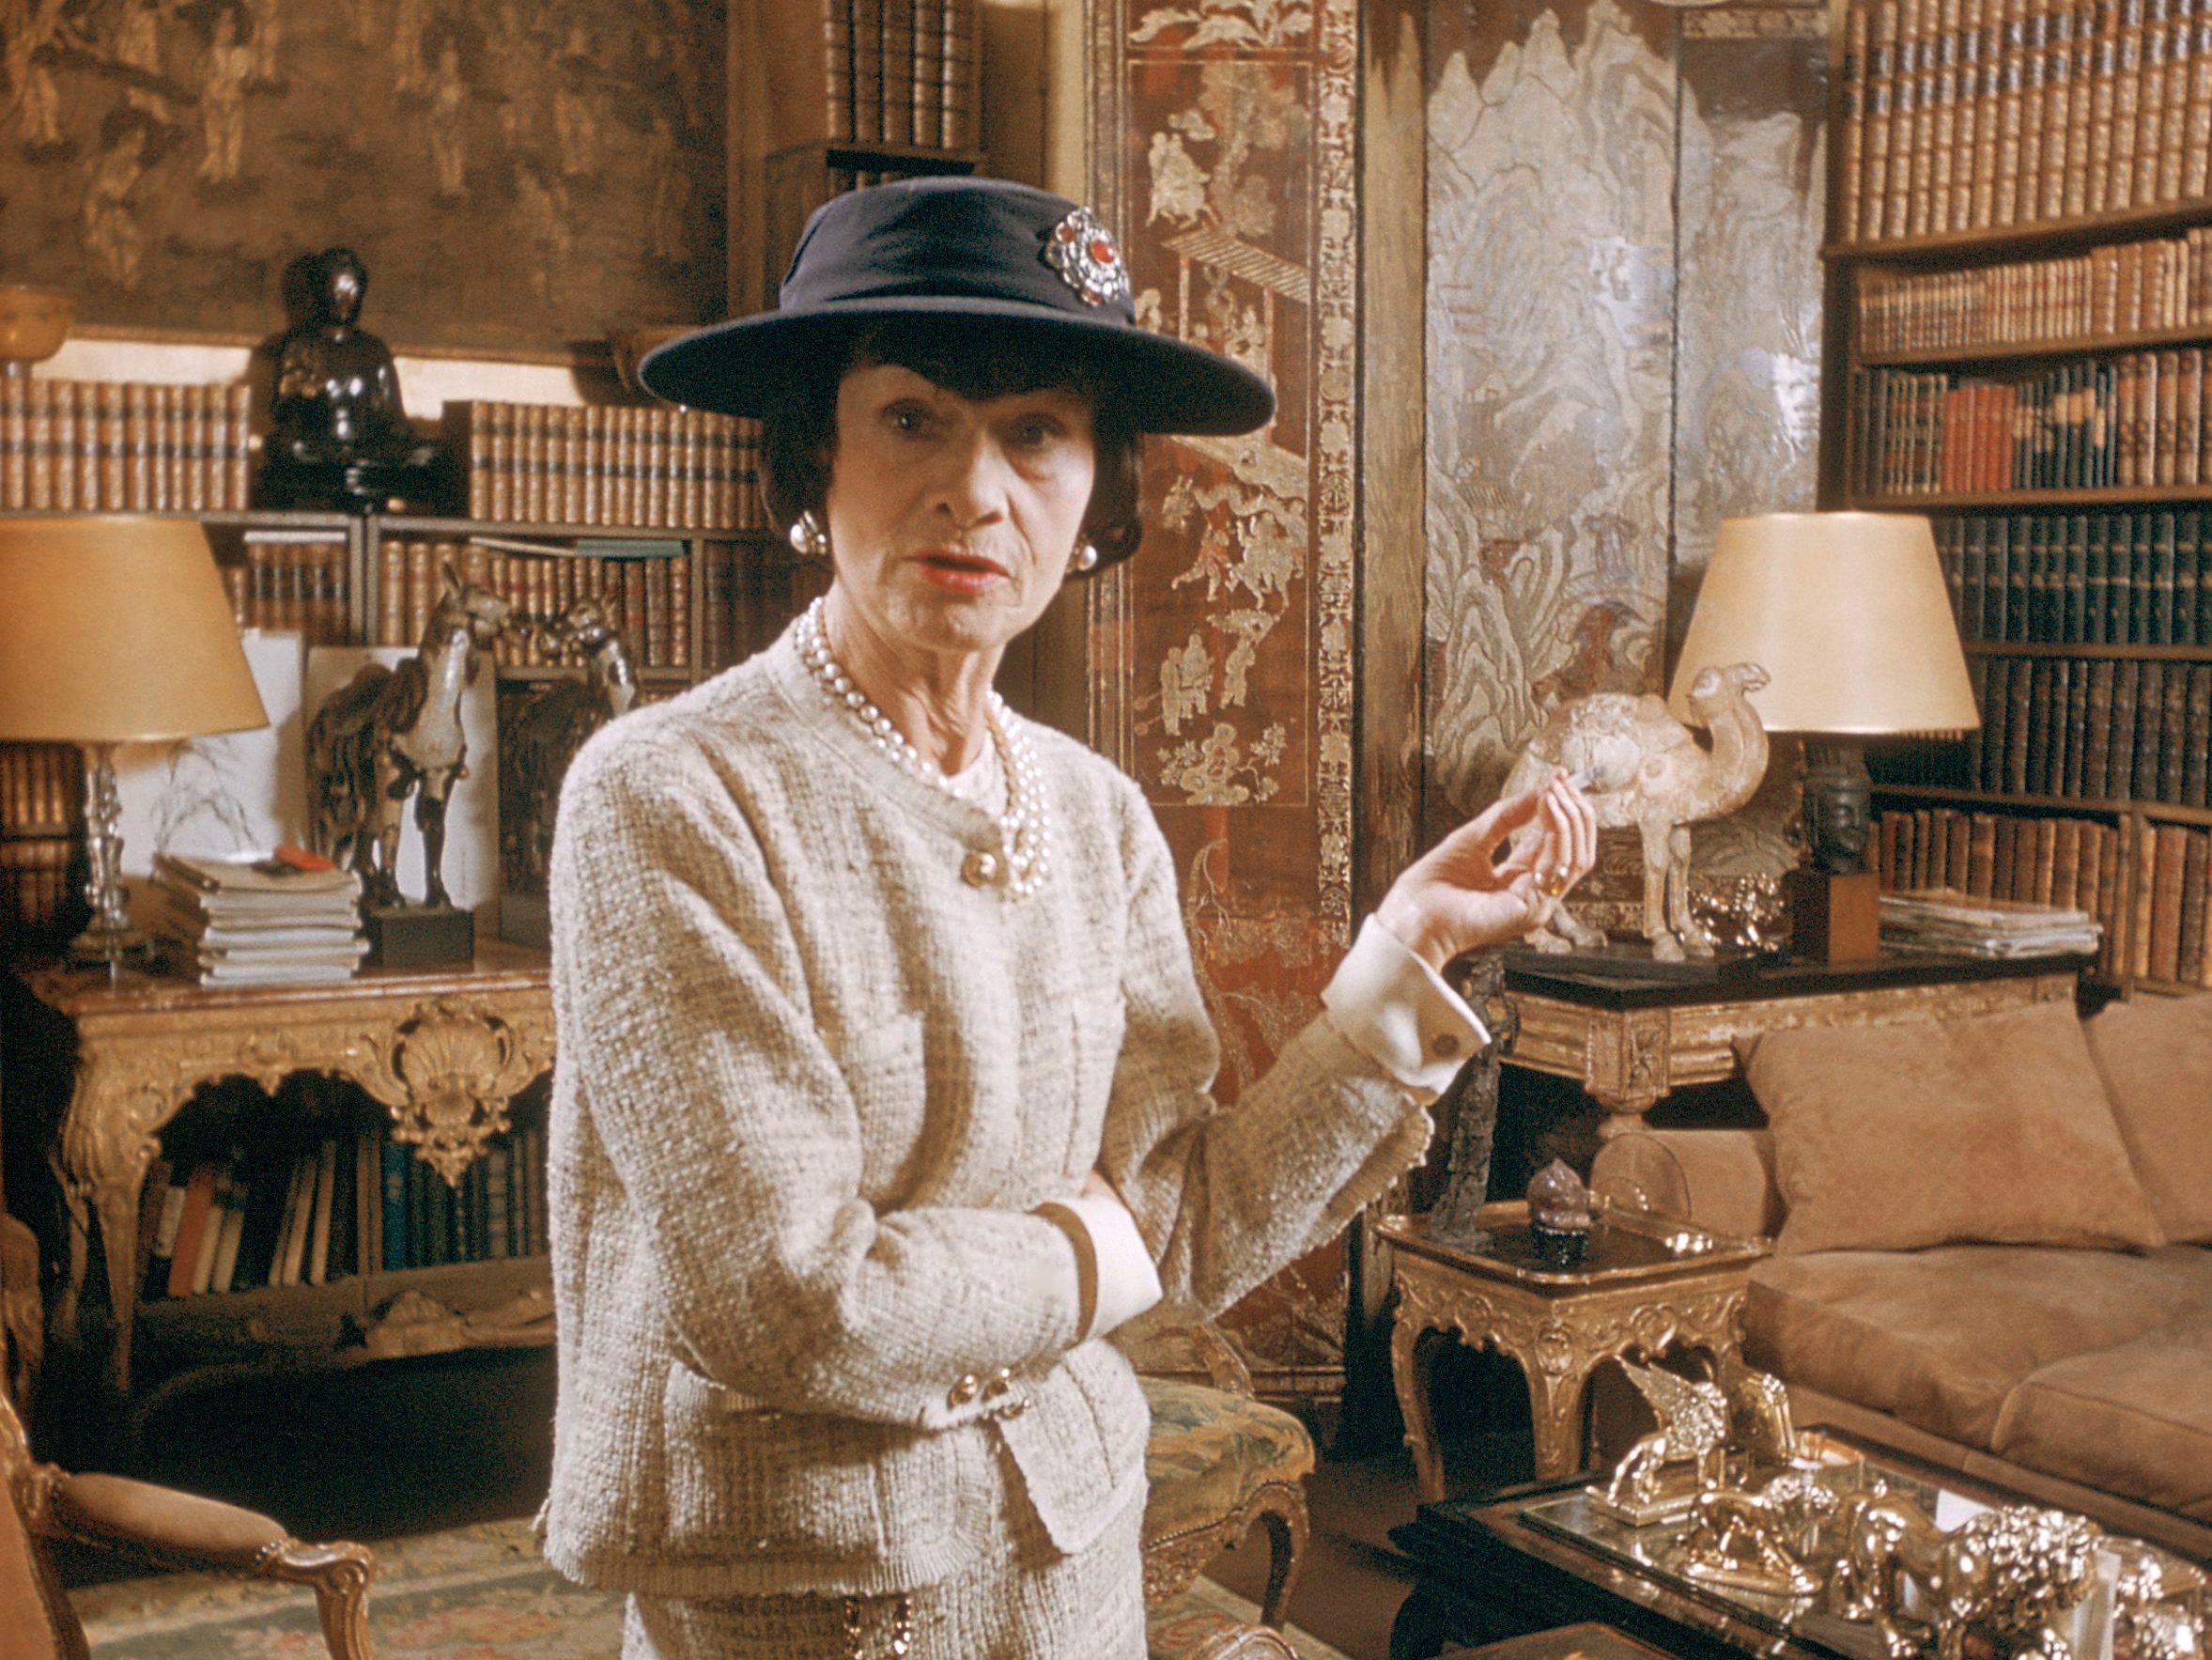 Coco Chanel's influence on the style of the French Riviera